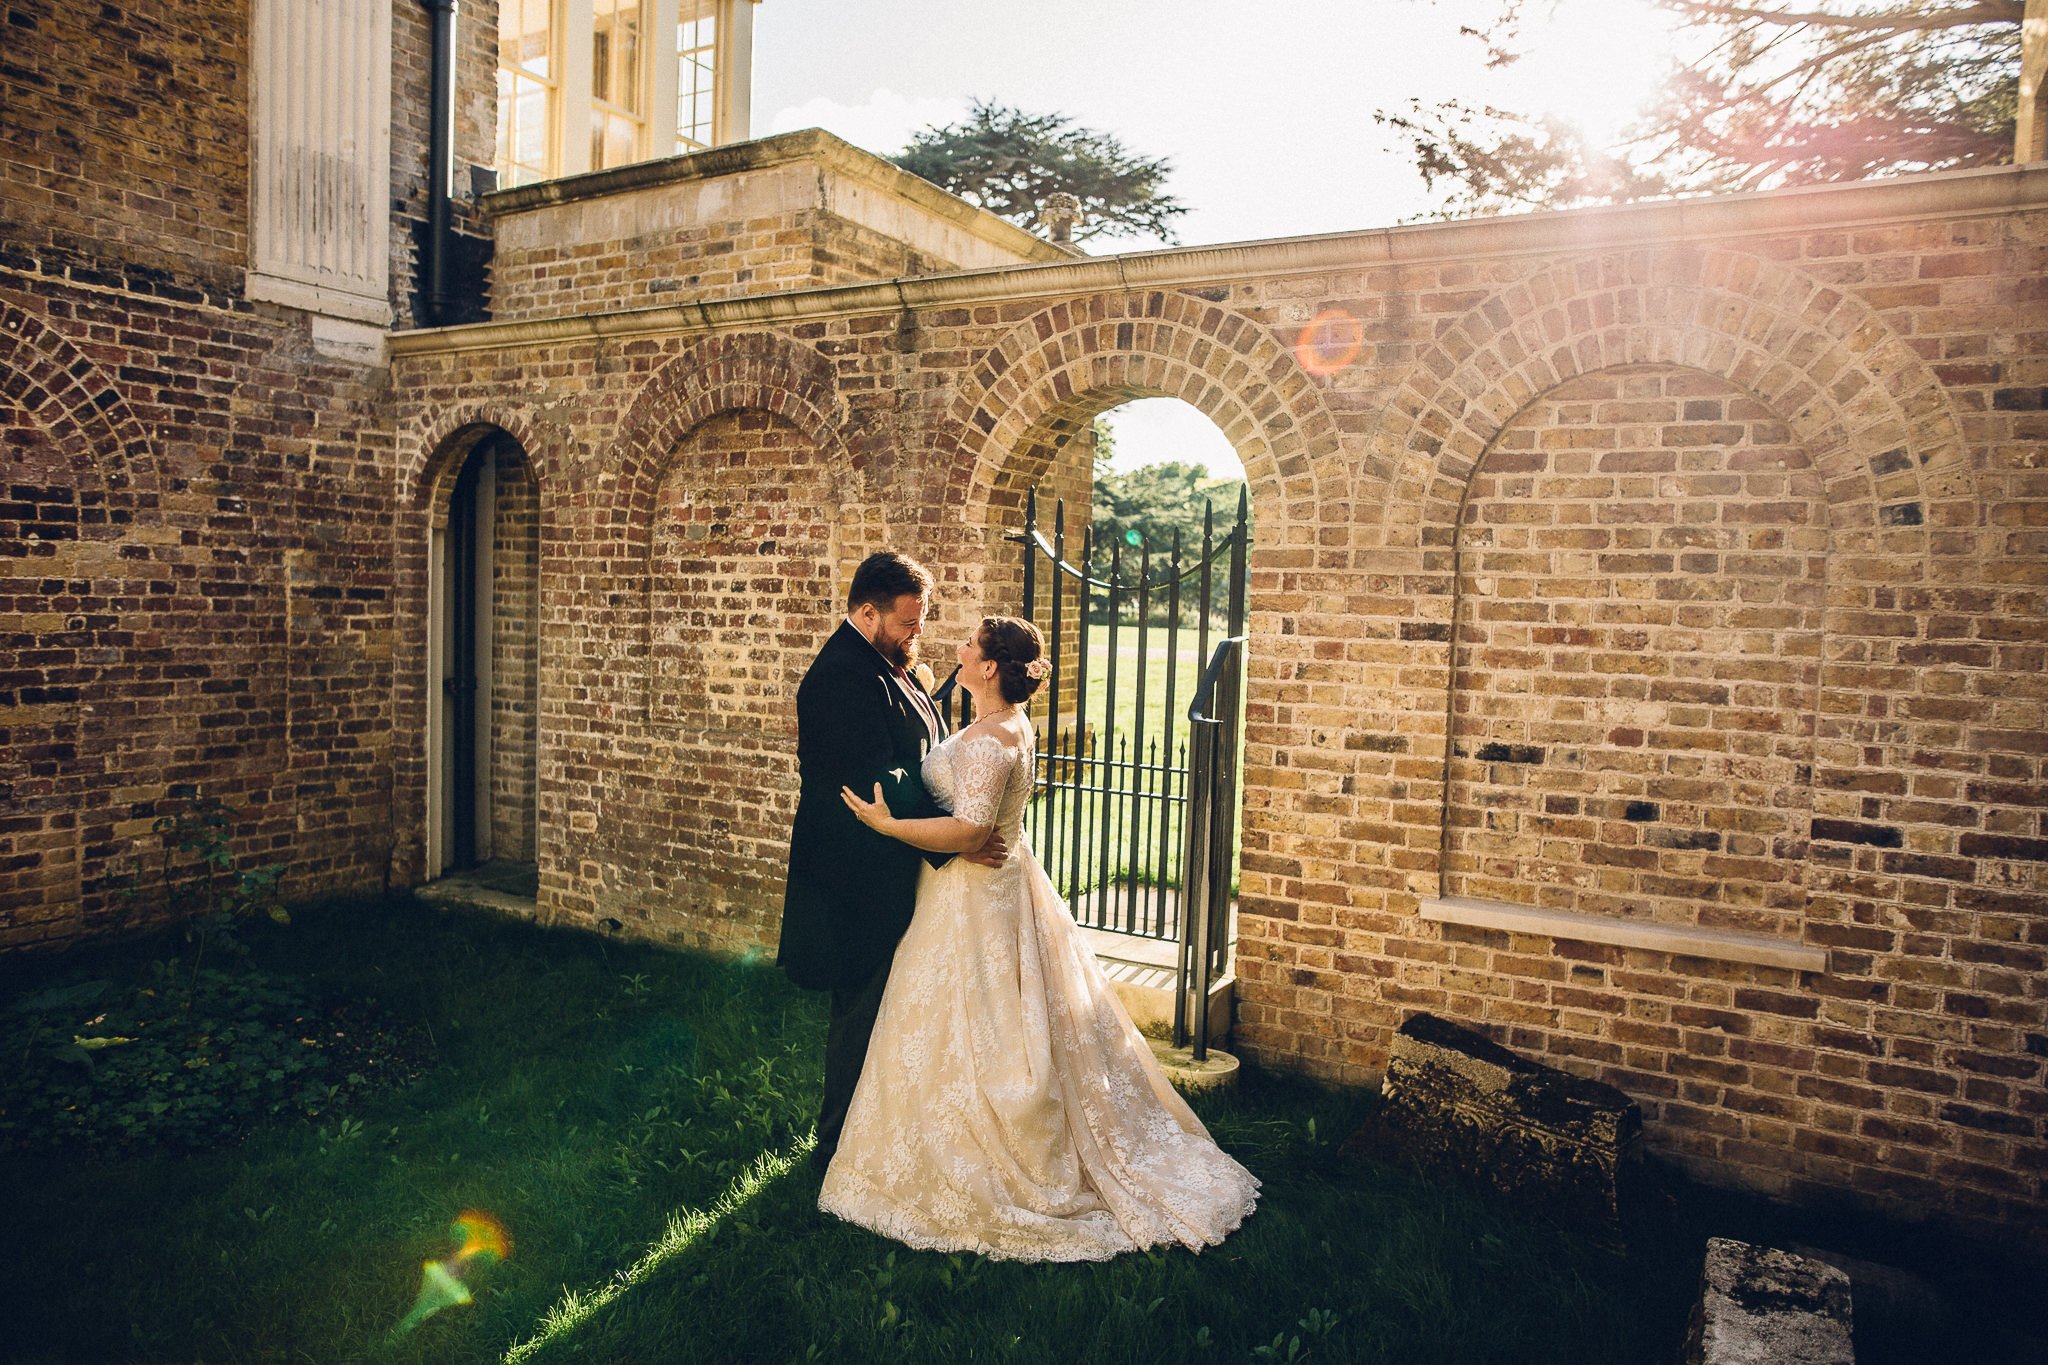  Bride and Groom in the late afternoon sun in the grounds of  Pitzhanger Manor 